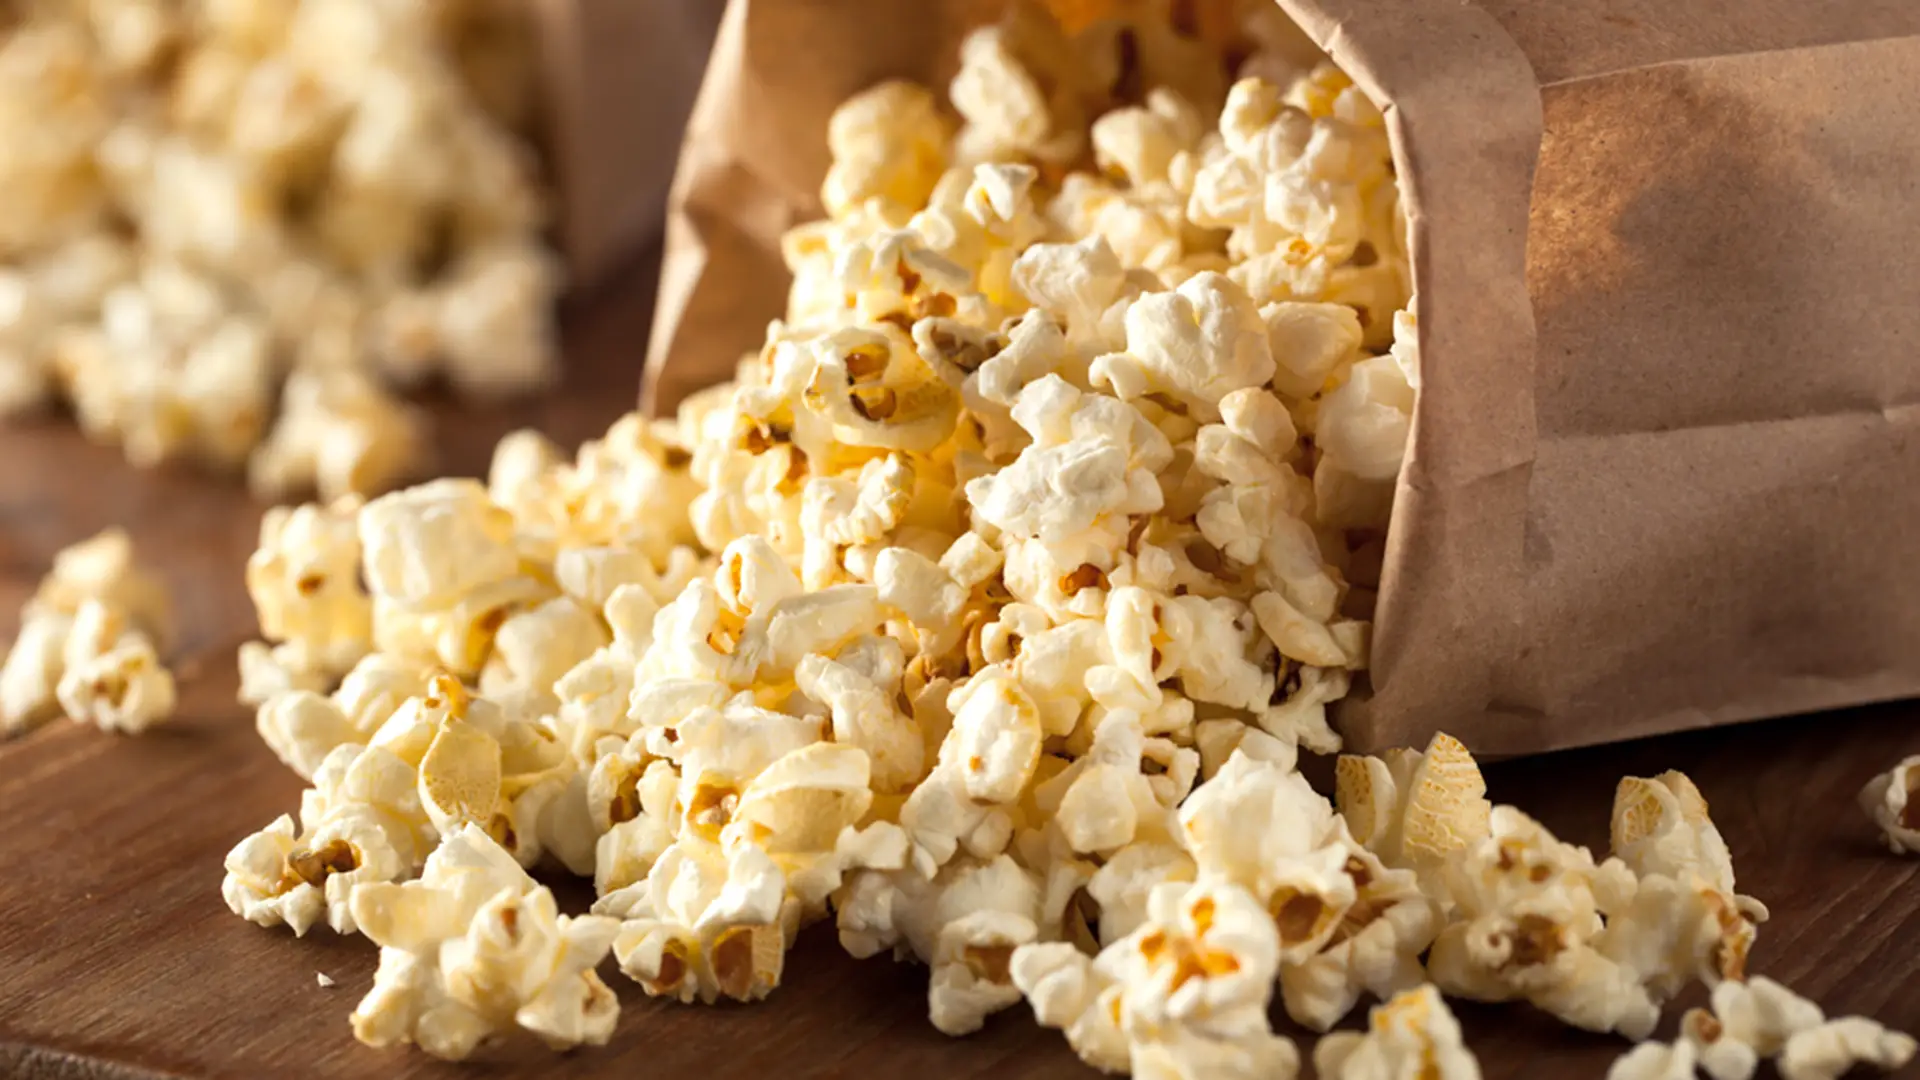 Truffle Popcorn As Safe Individual Appetizer For Social Distancing